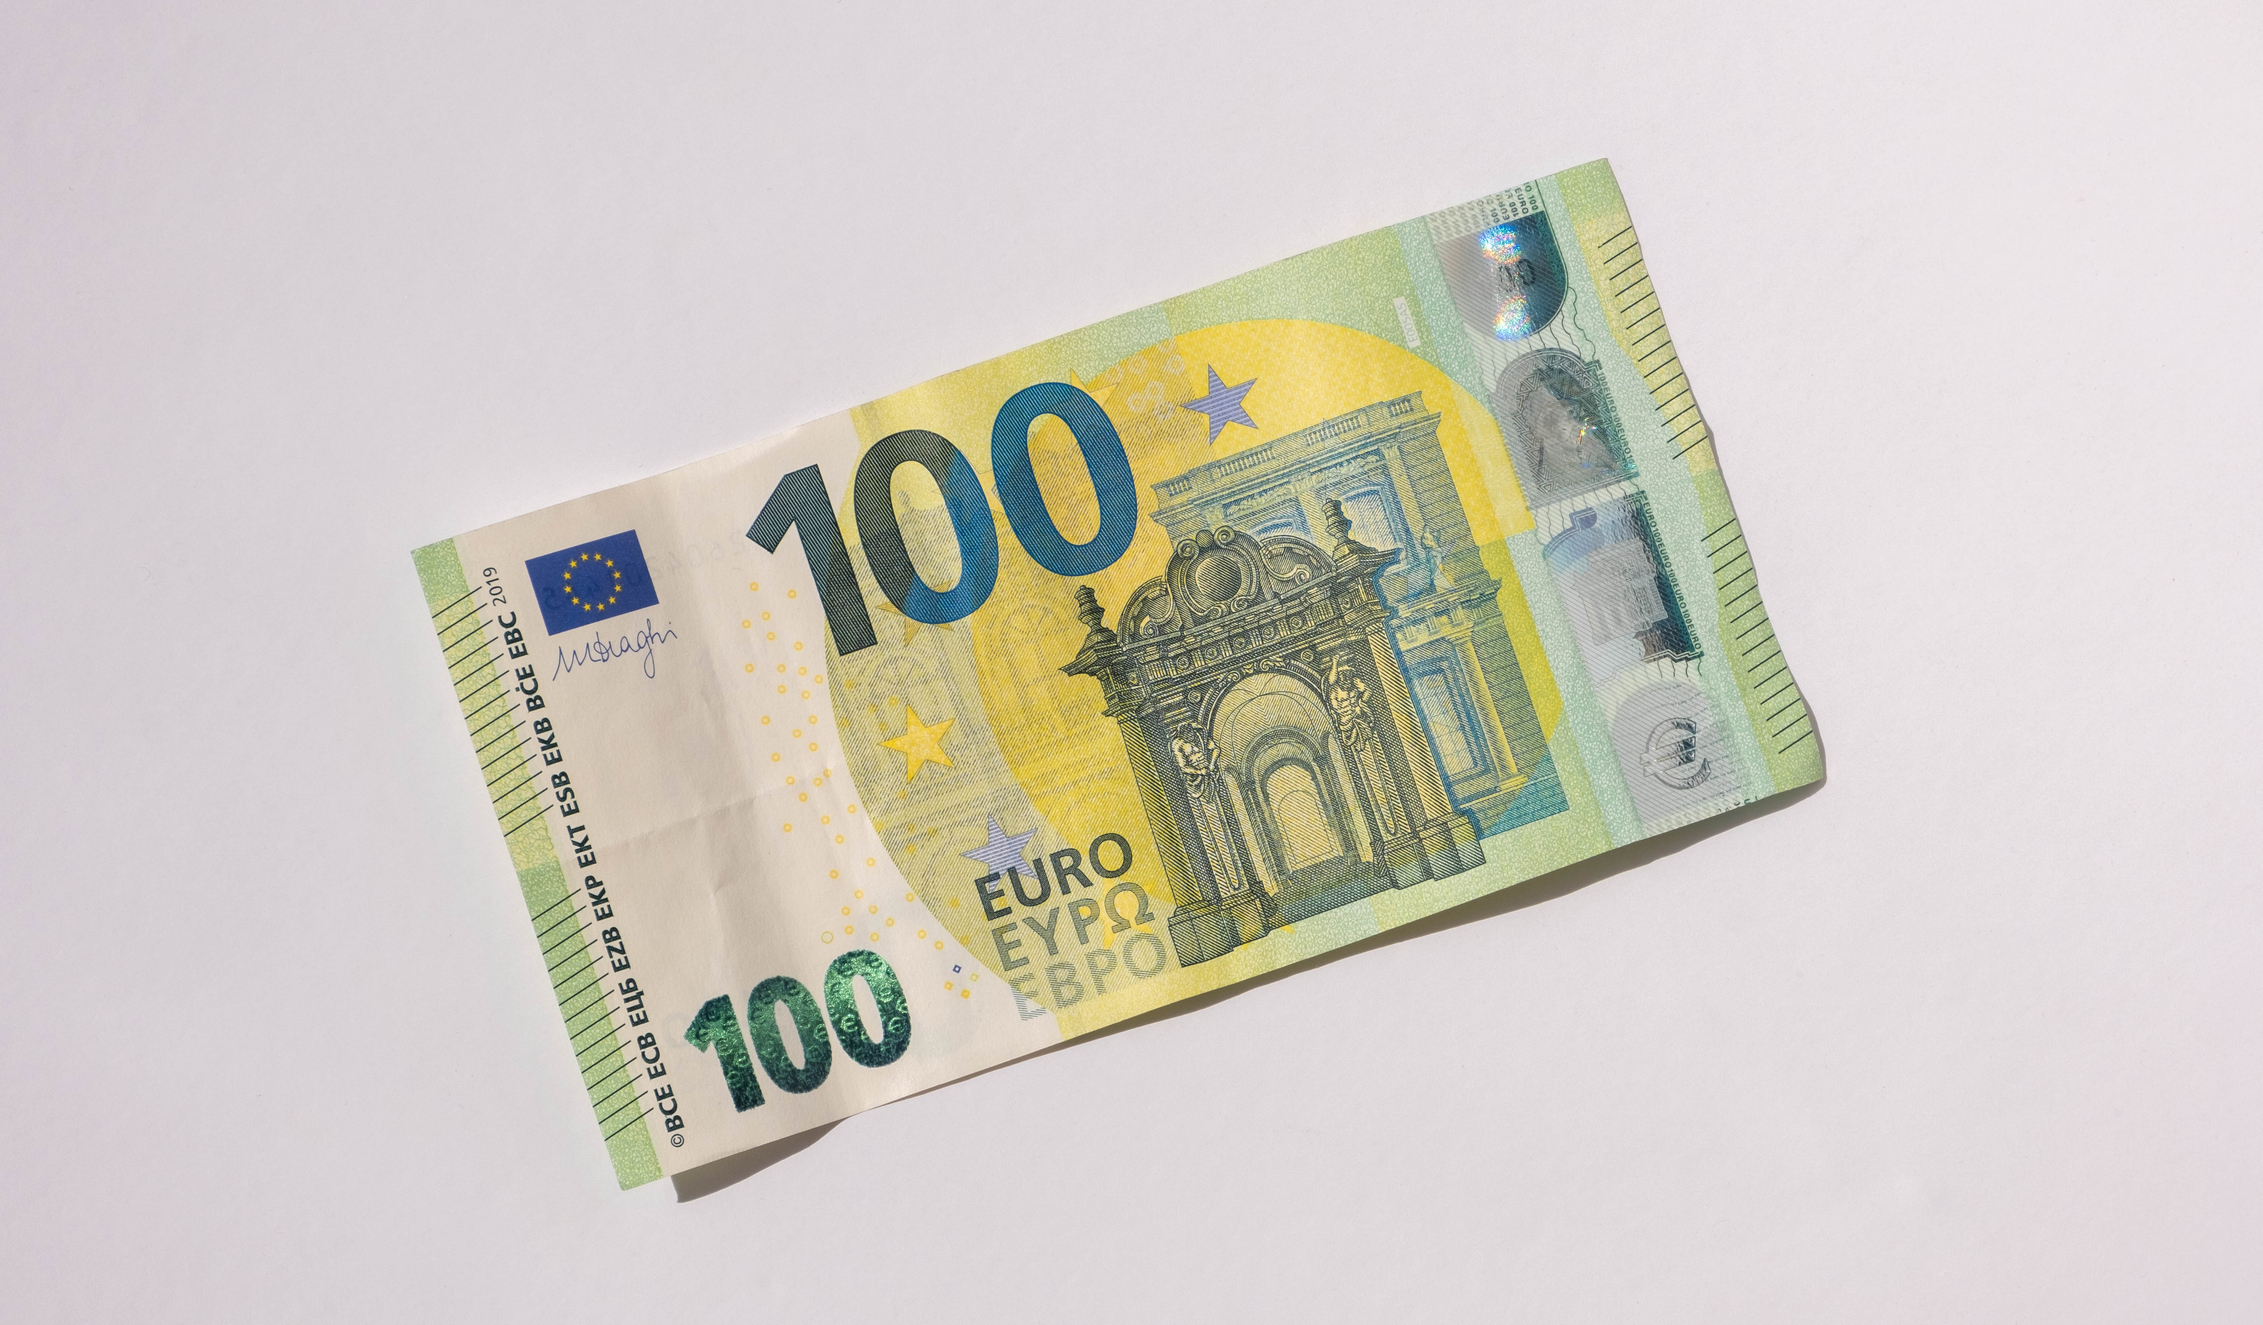 Buy Authentic and Fake Counterfeit Euro Banknotes Online at LegalCounterfeitNote.com